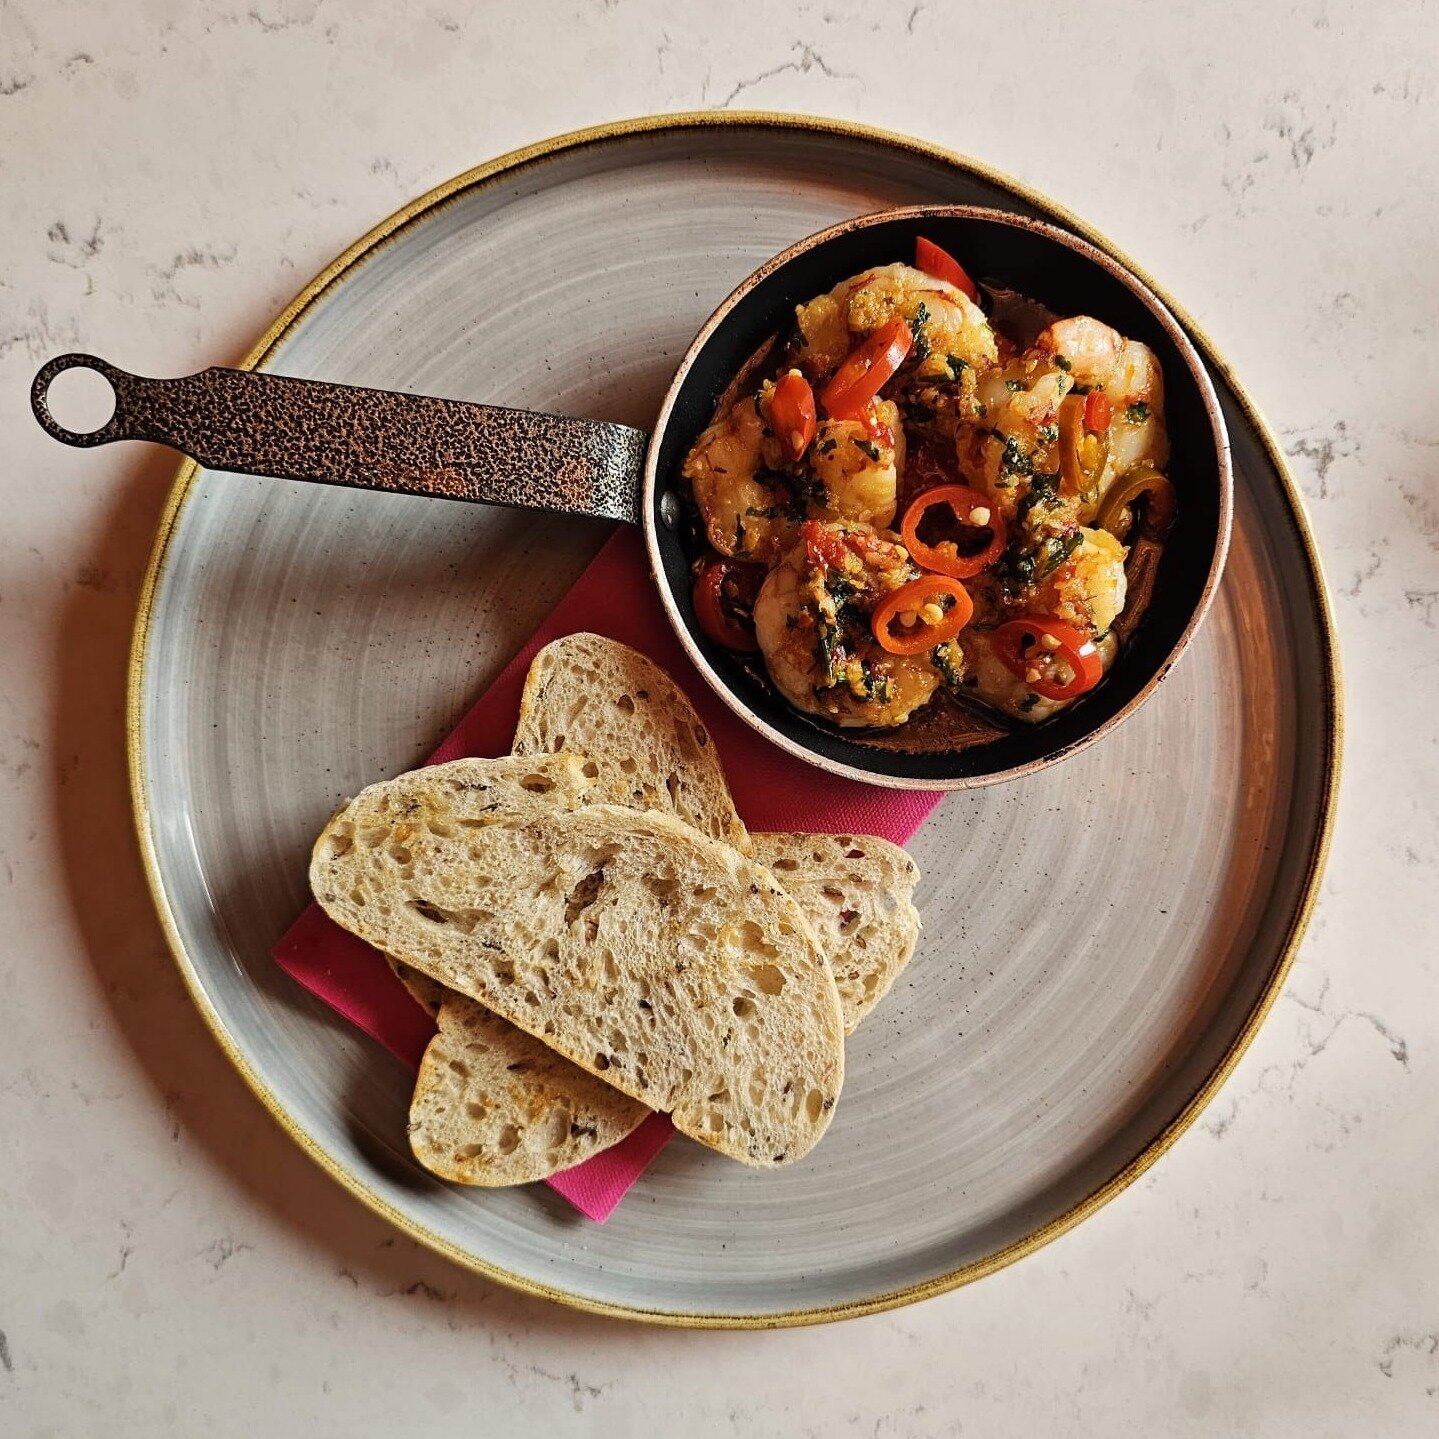 Chilli &amp; Garlic Prawn Pil Pil 🌶

Pan-fried prawns, white wine, garlic &amp; chilli oil, served with crusty bread 🍤

One of our absolute favourites from our new Evening Menu! 🍽

Have you tried them yet? 😋

No need to book, walk-ins welcome!